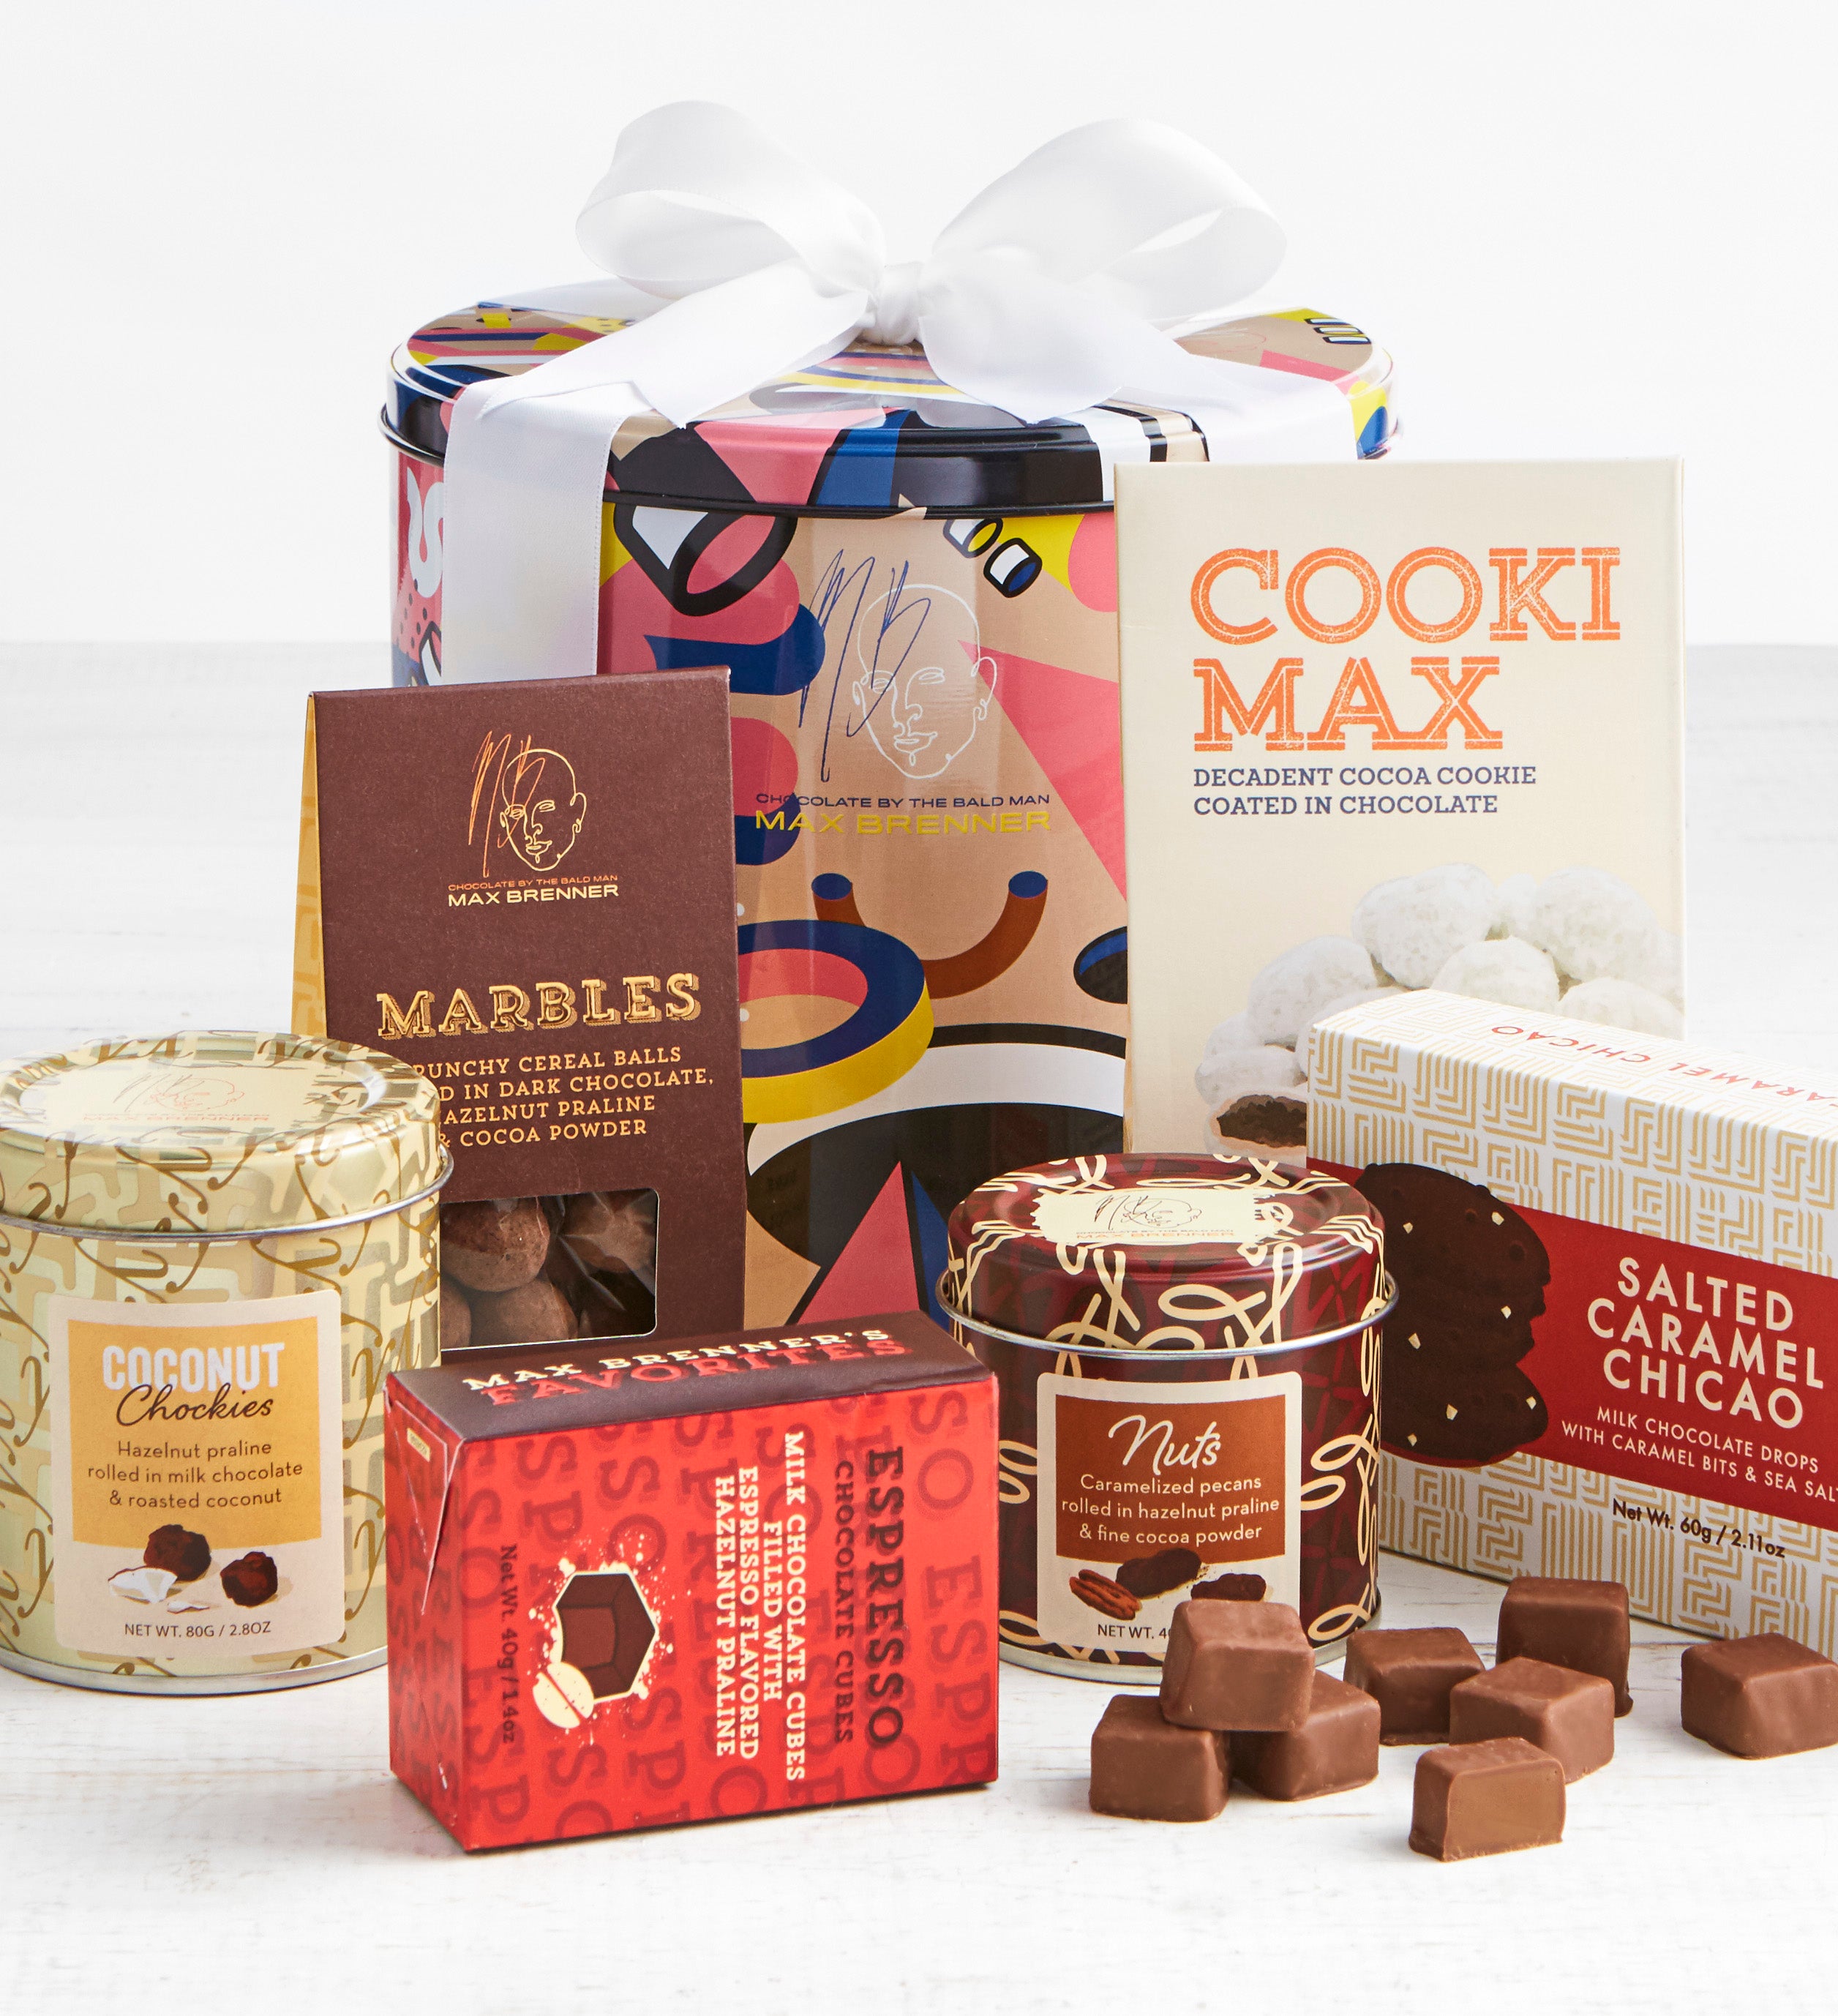 Max Brenner Deluxe Chocolate Desire Gift Set